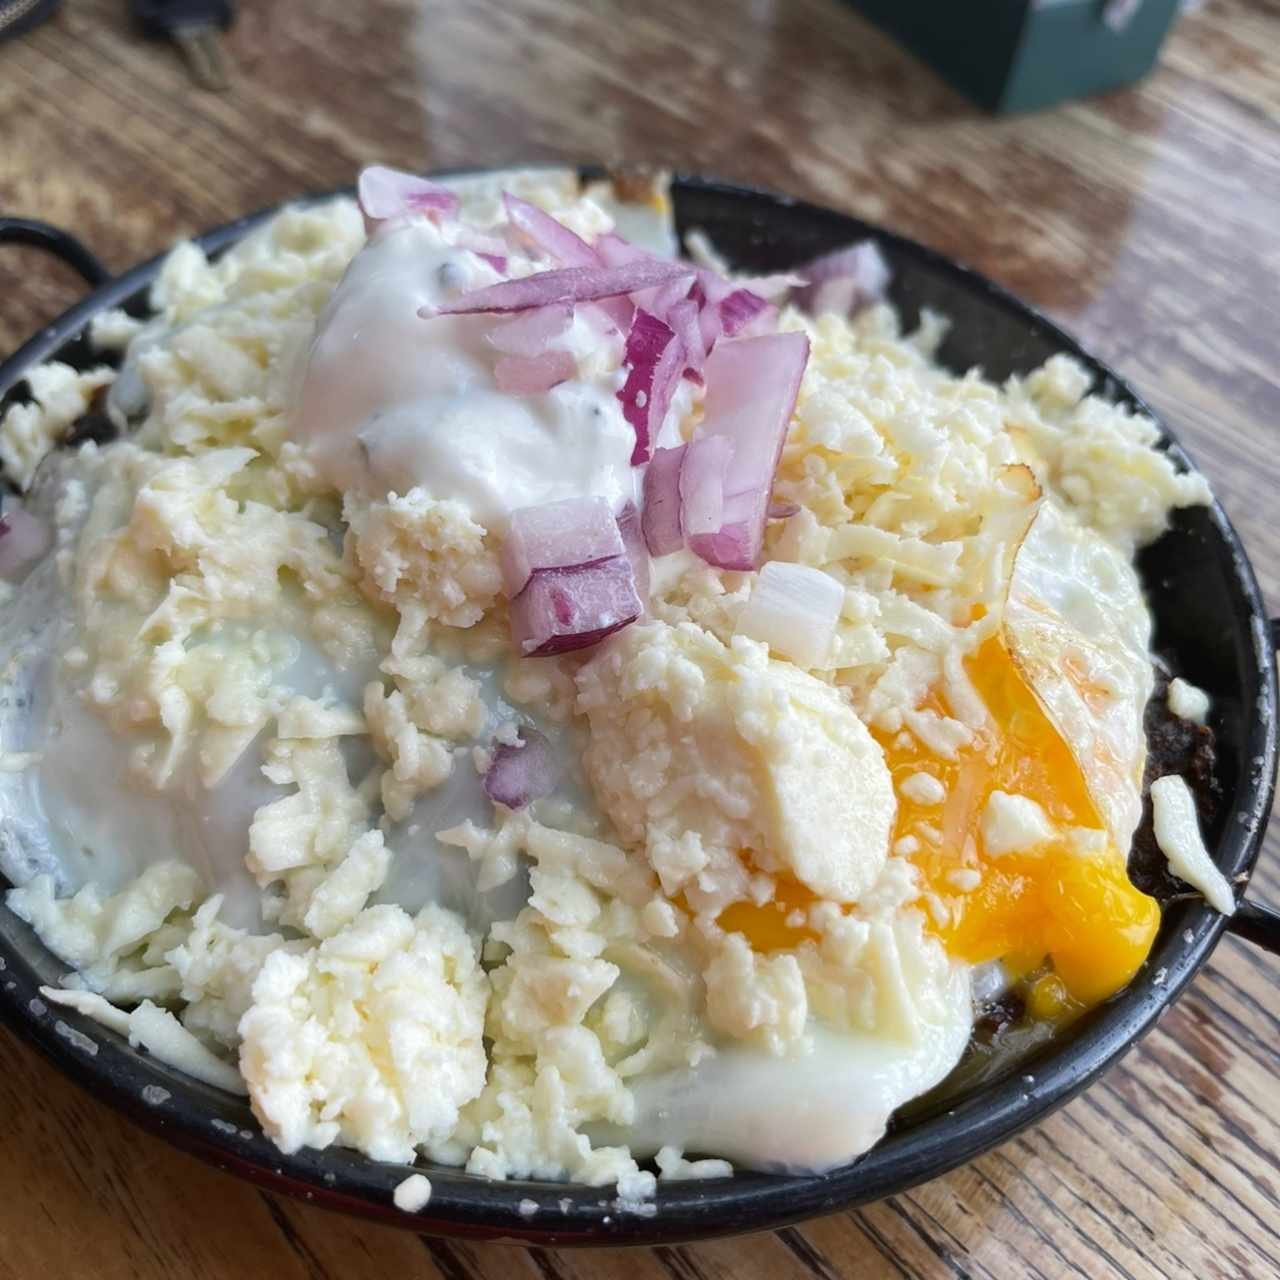 Brunch - Chilaquiles Panameños